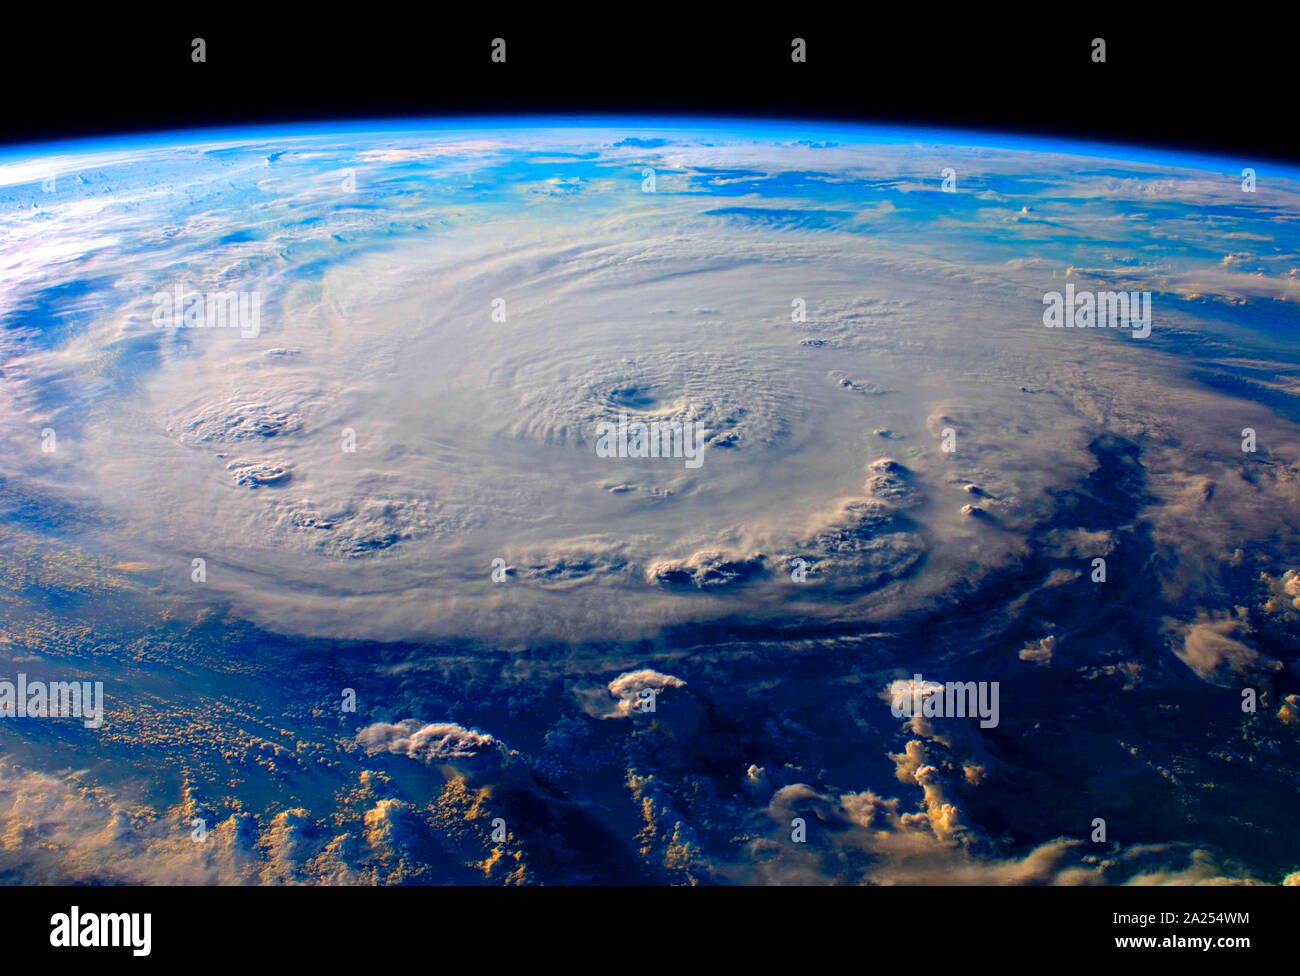 Hurricane Felix from ISS 03 sept 2007. Hurricane Felix seen from the International Space Station was a Category 5. Felix formed from a tropical wave on August 31, passing through the southern Windward Islands on September 1 before strengthening to attain hurricane status. A day later it rapidly strengthened into a major hurricane, and early on September 3 it was upgraded to Category 5 status. Stock Photo